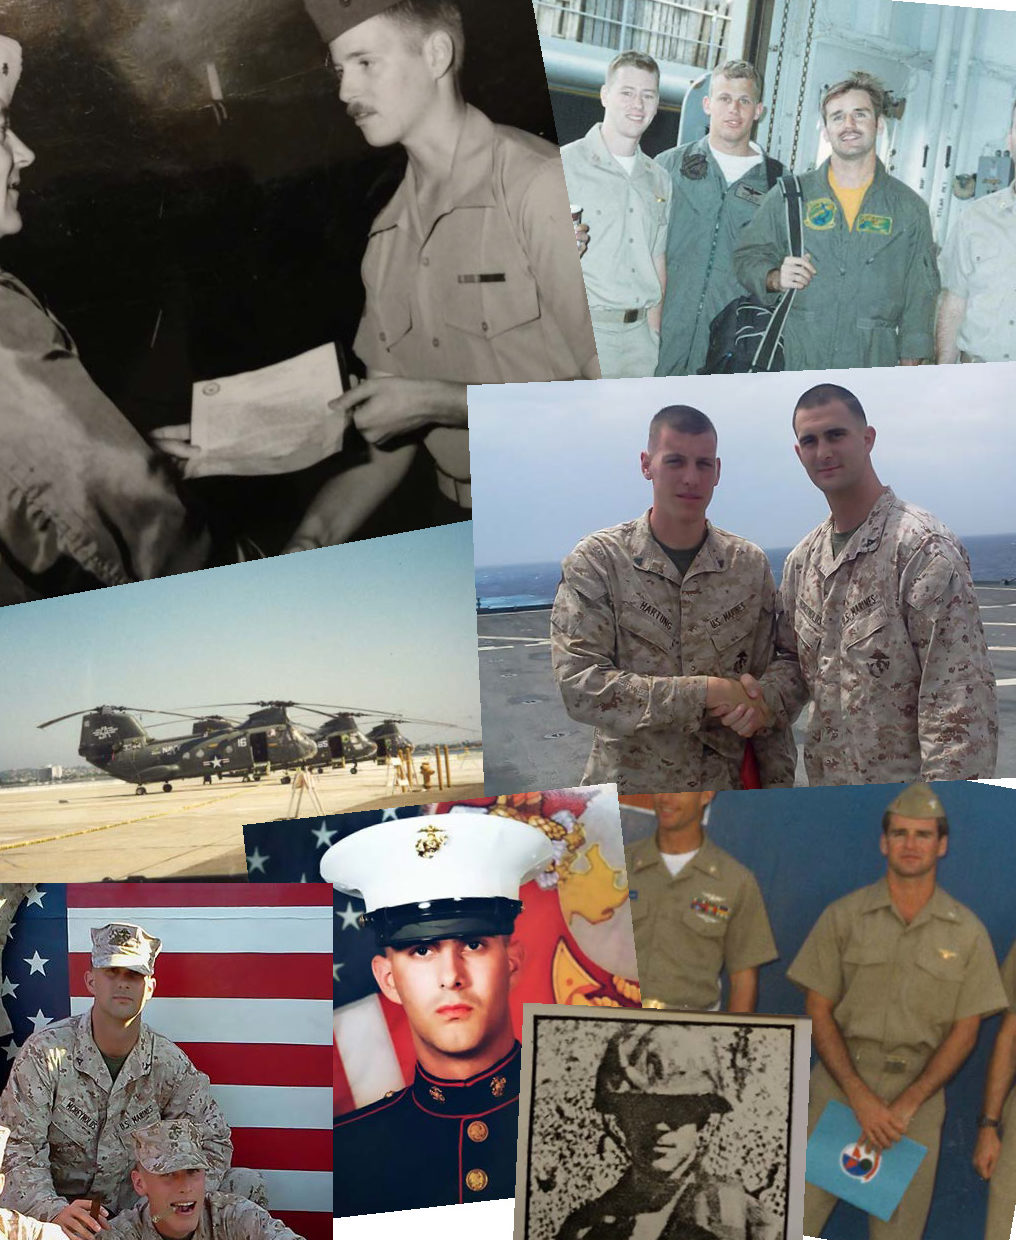 A few of Apex’s veterans: David Grant (top left and bottom middle-right); Mark Goodwin (top right and bottom right); Chris McReynolds (bottom middle-left), and McReynolds and Matt Hartung, ROCC operator and Marine Corps staff sergeant, bottom left and middle right).